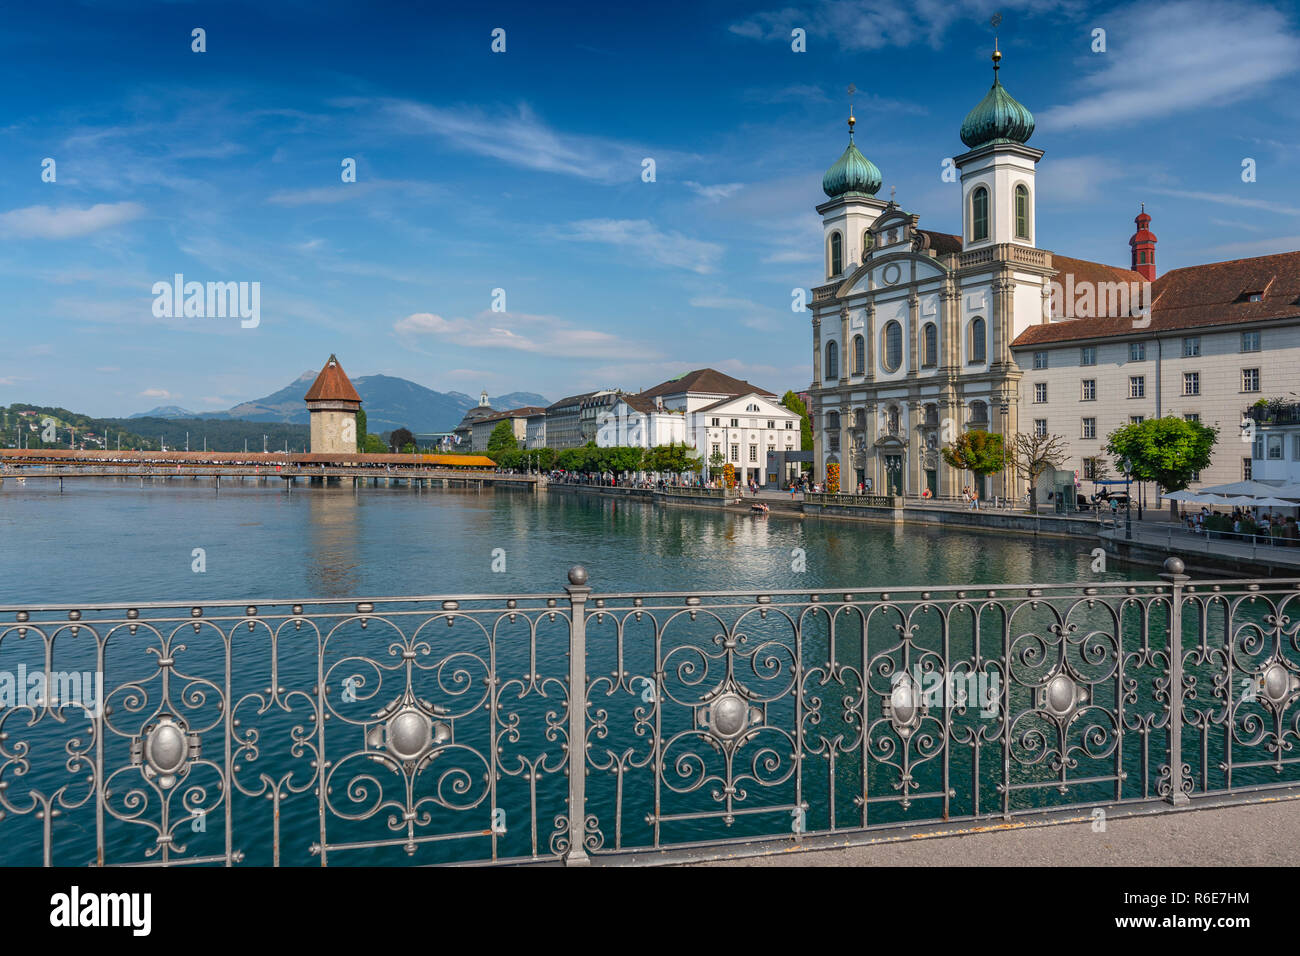 The Lucerne Jesuit Church Is A Catholic Church In Lucerne Along The River Reuss, Switzerland Stock Photo